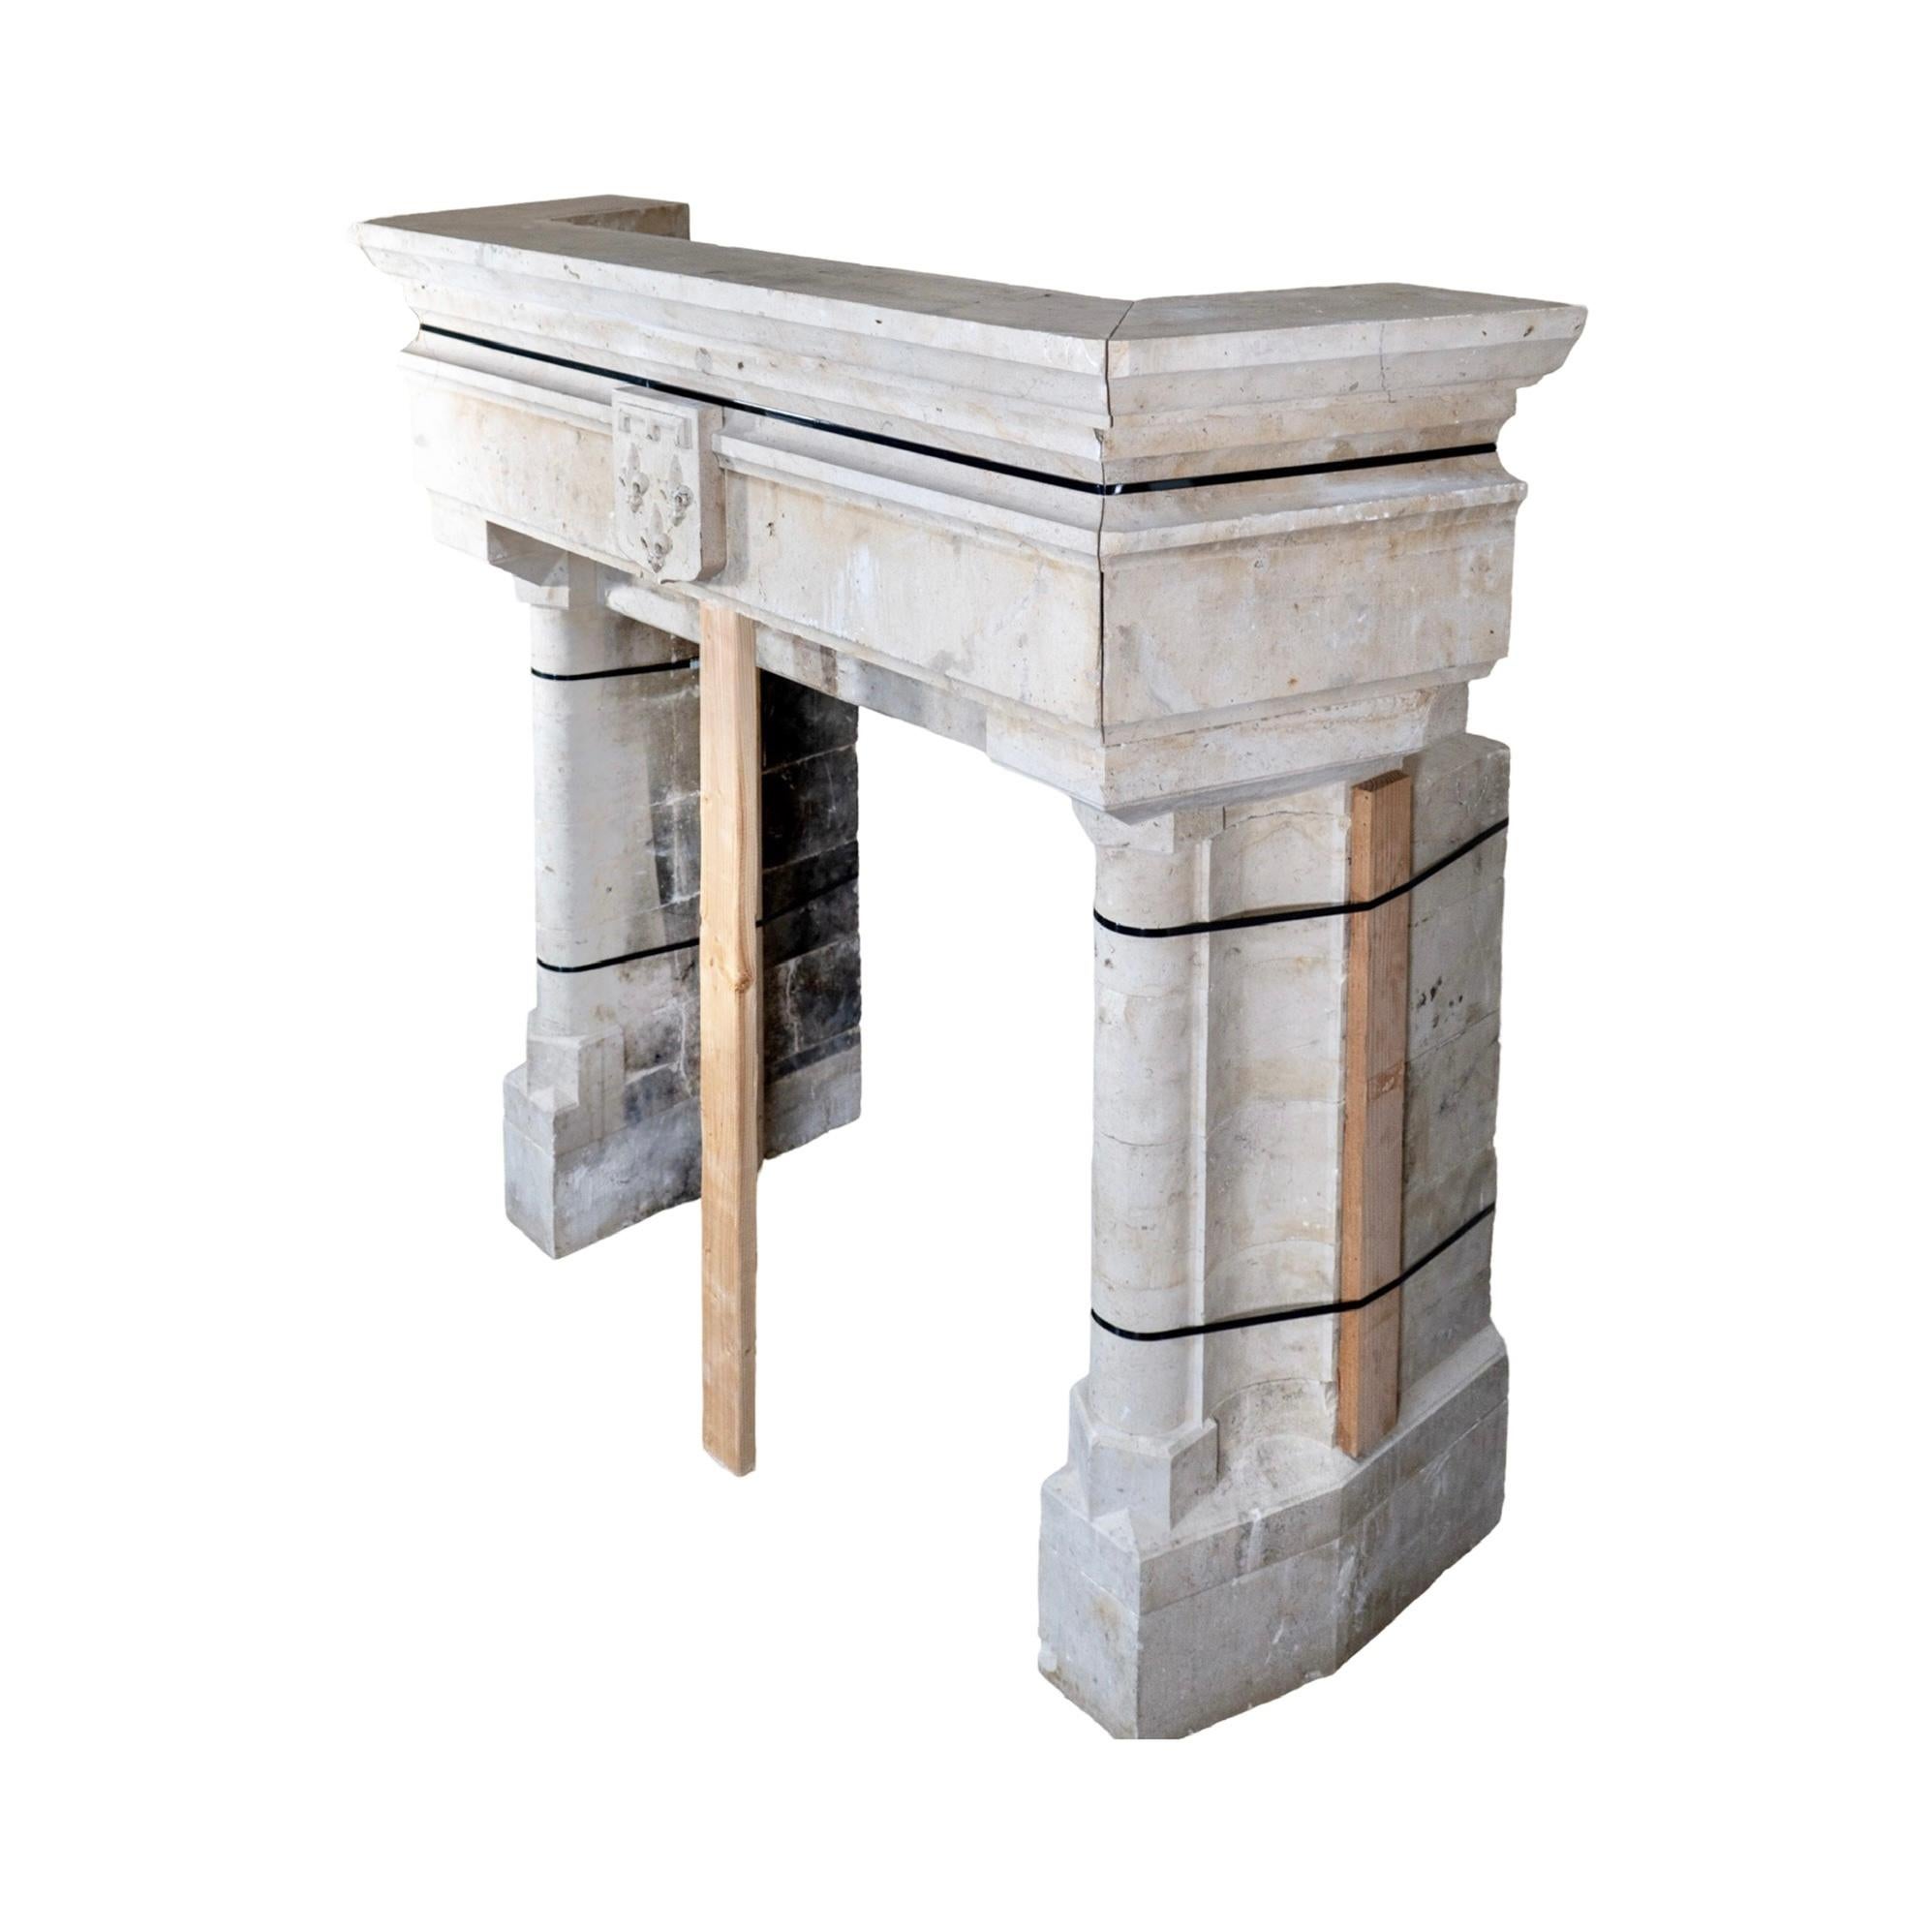 19th Century French Limestone Mantel For Sale